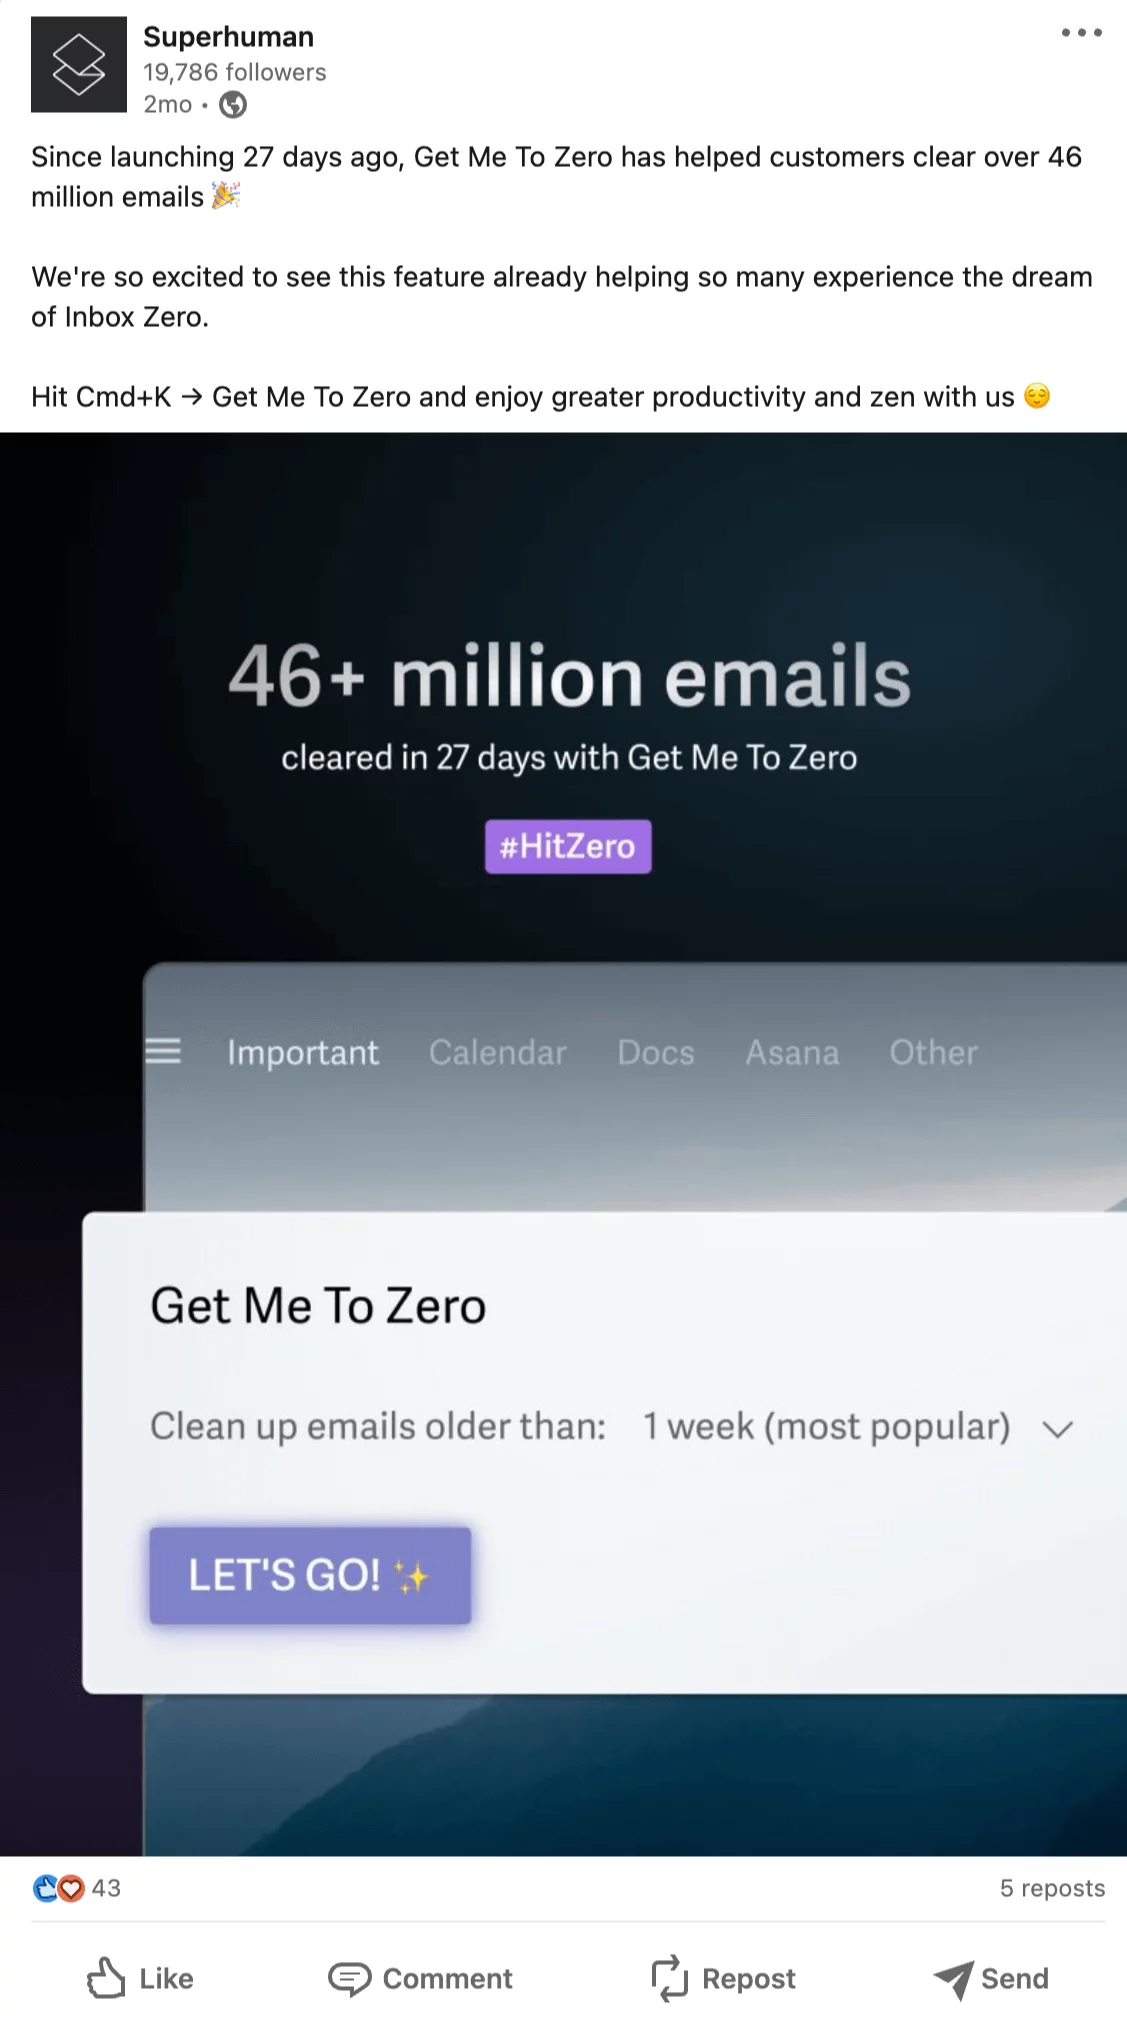 Superhuman's LinkedIn share about helping their clients clear over 46 million emails.